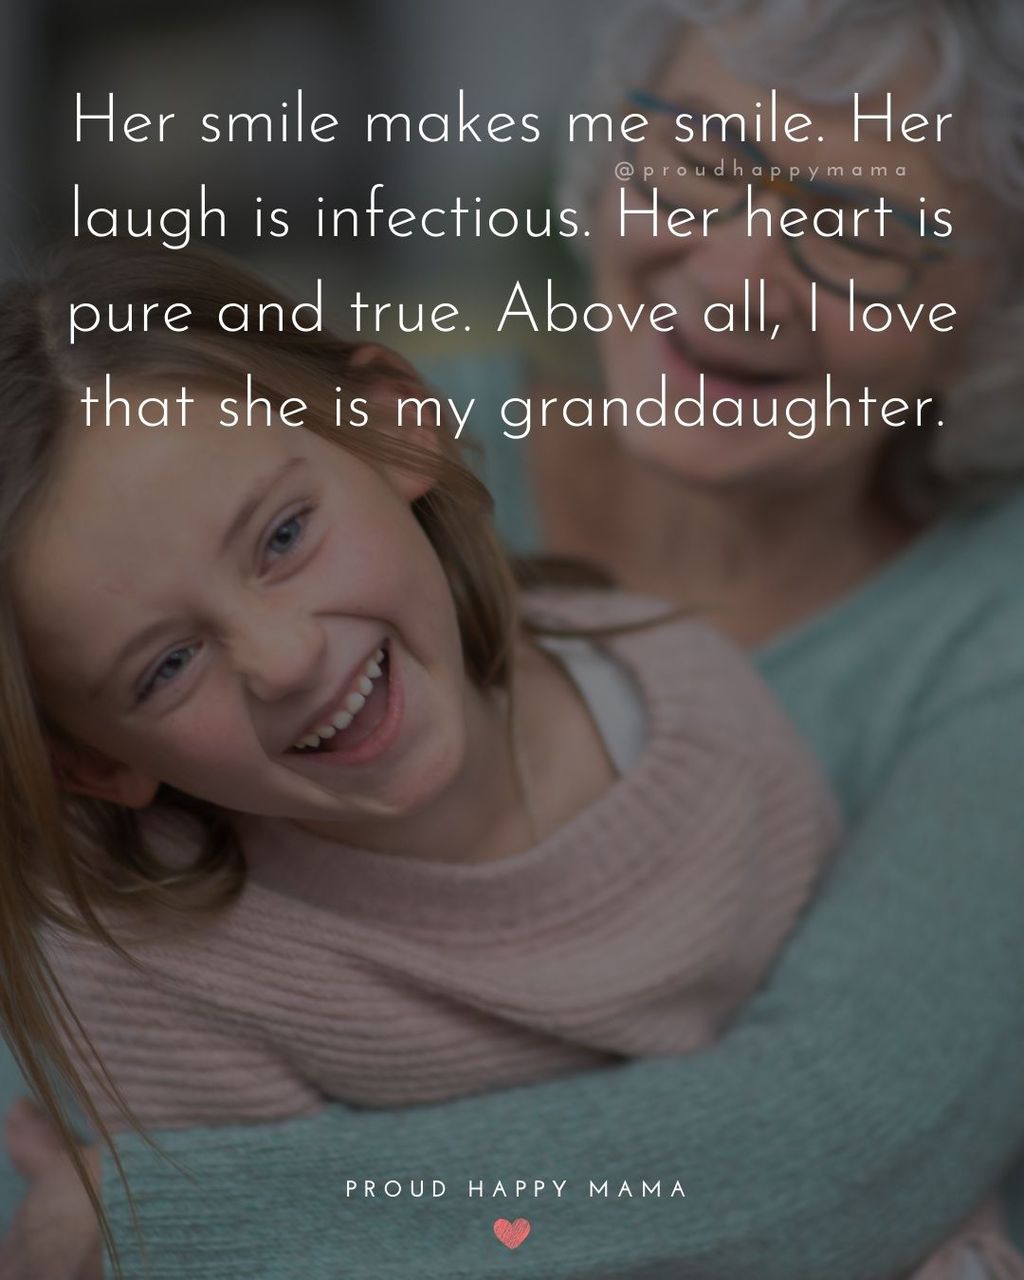 Granddaughter Quotes - Her smile makes me smile. Her laugh is infectious. Her heart is pure and true. Above all, I love that she is my granddaughter.